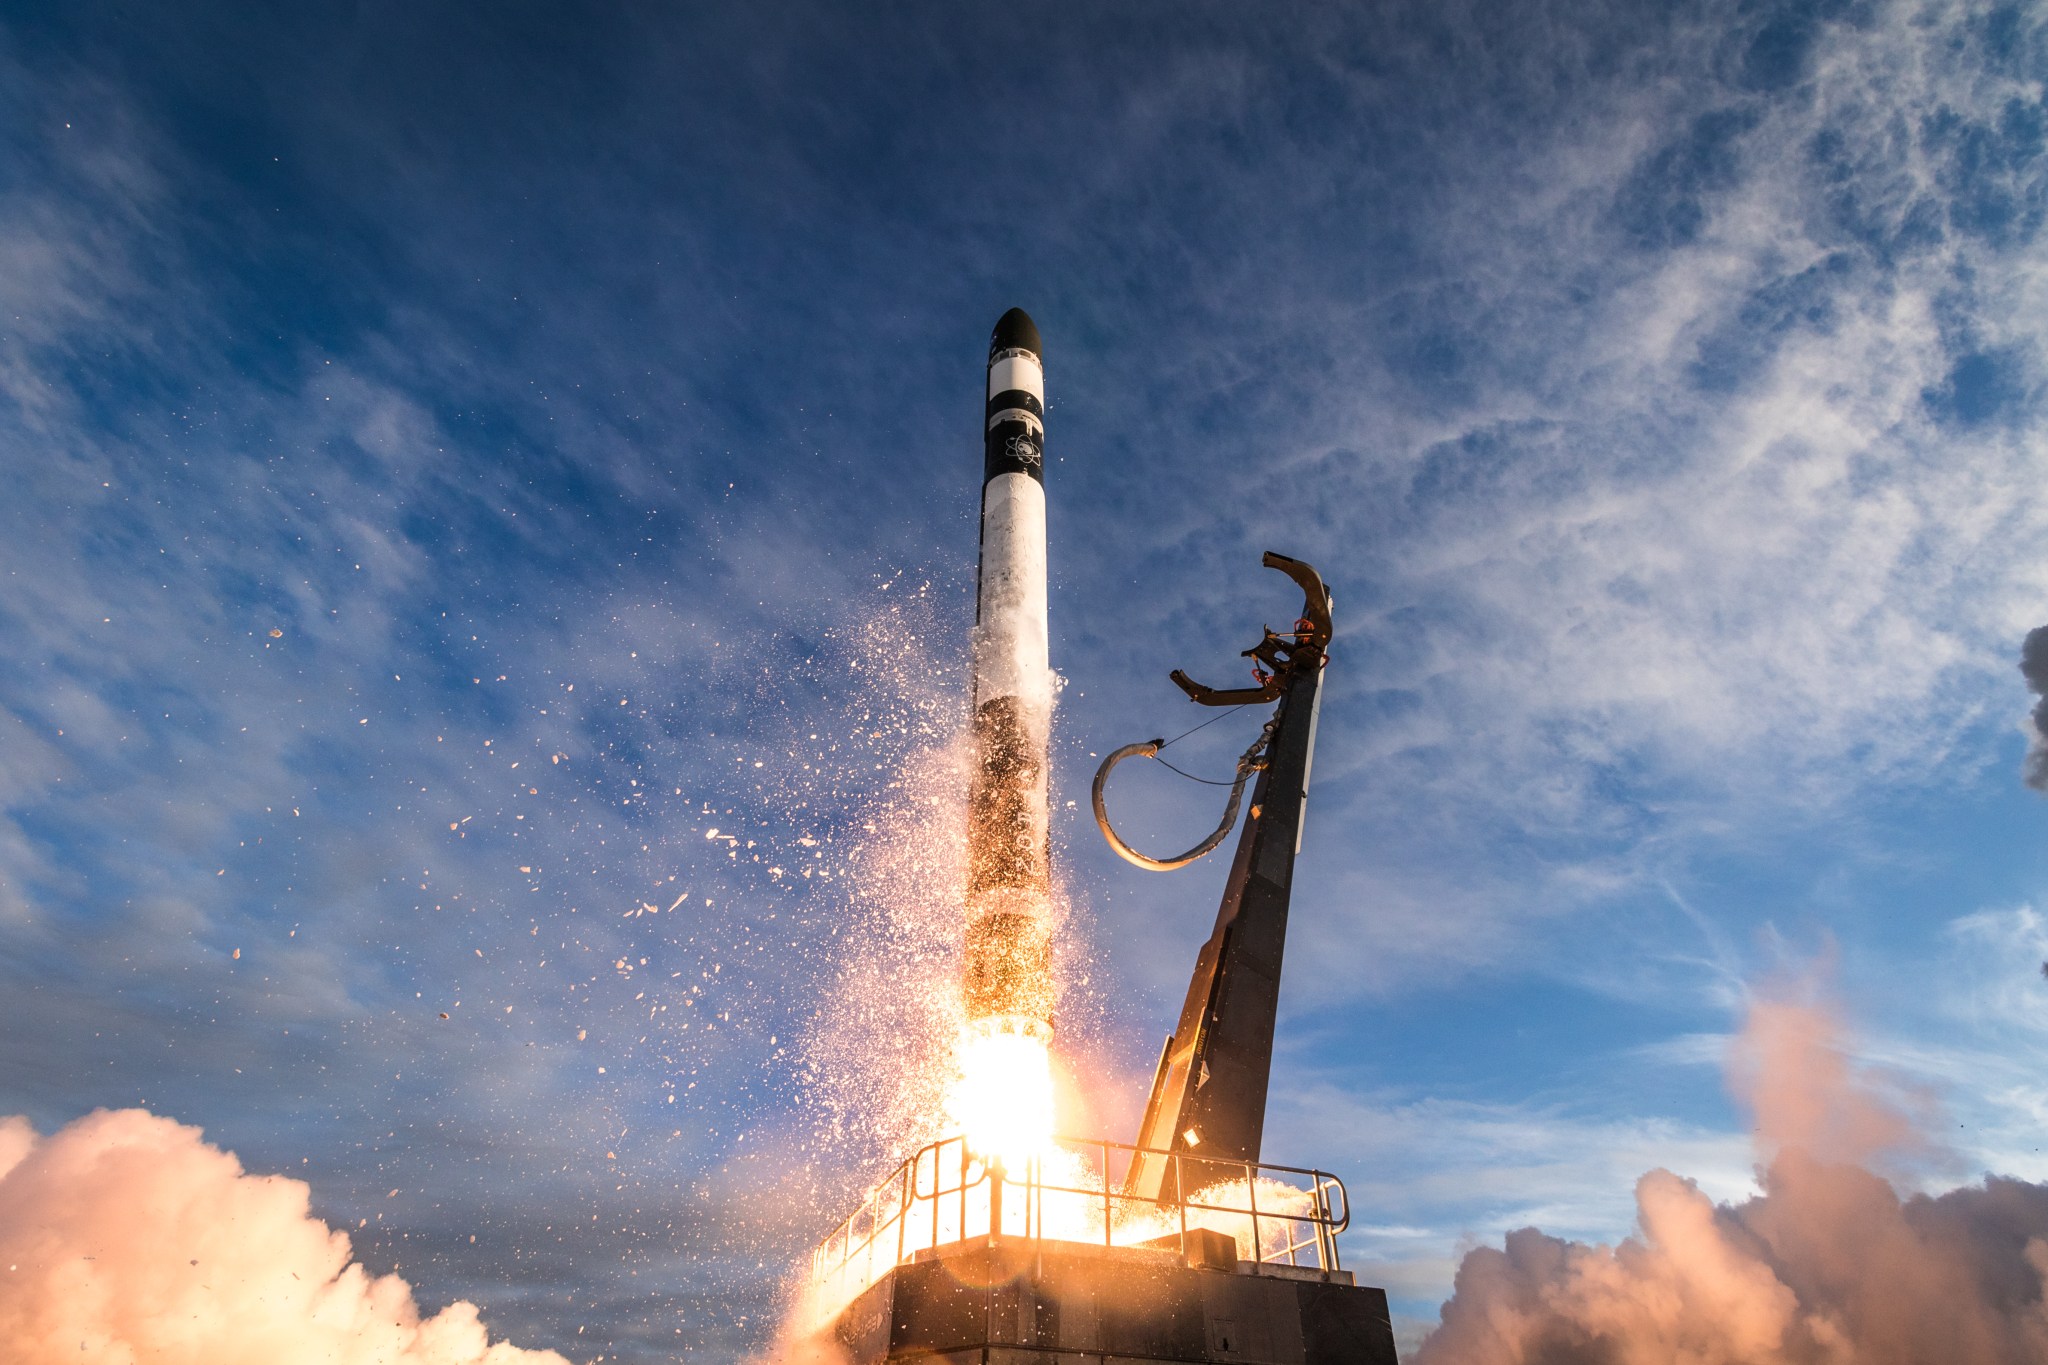 Rocket Lab's Electron rocket lifts off from Launch Complex 1 for the NASA ELaNa19 mission.